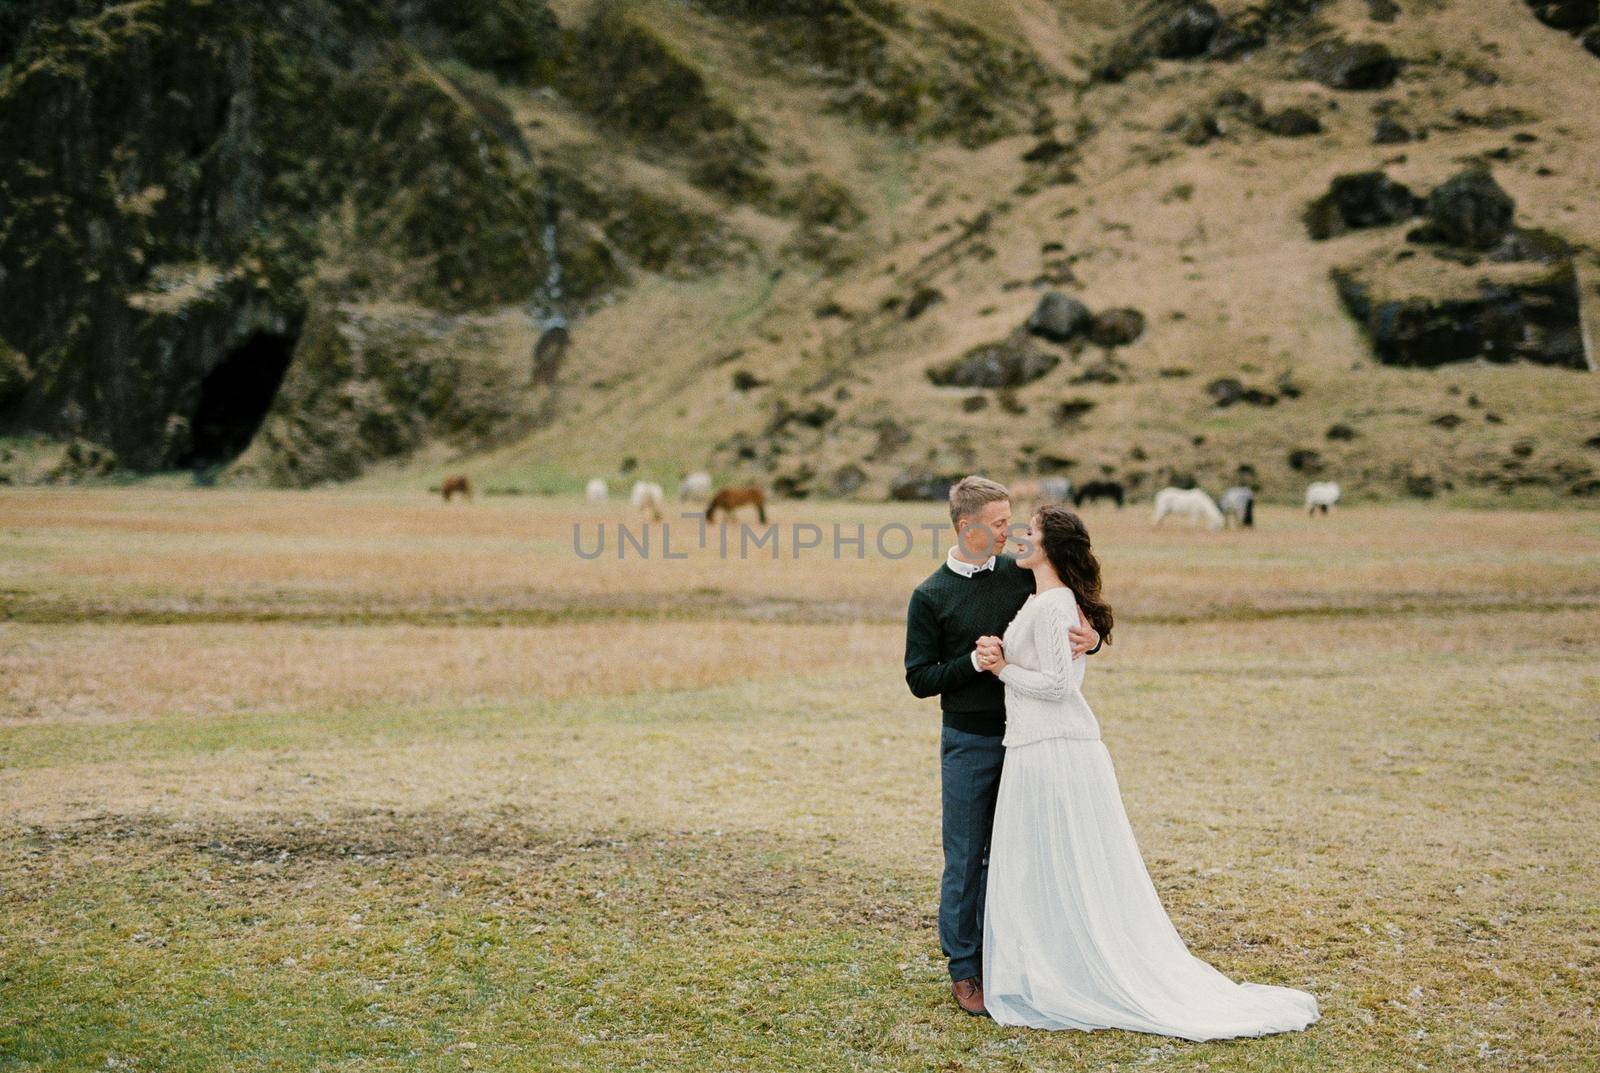 Groom hugs bride against the backdrop of grazing horses. Iceland by Nadtochiy